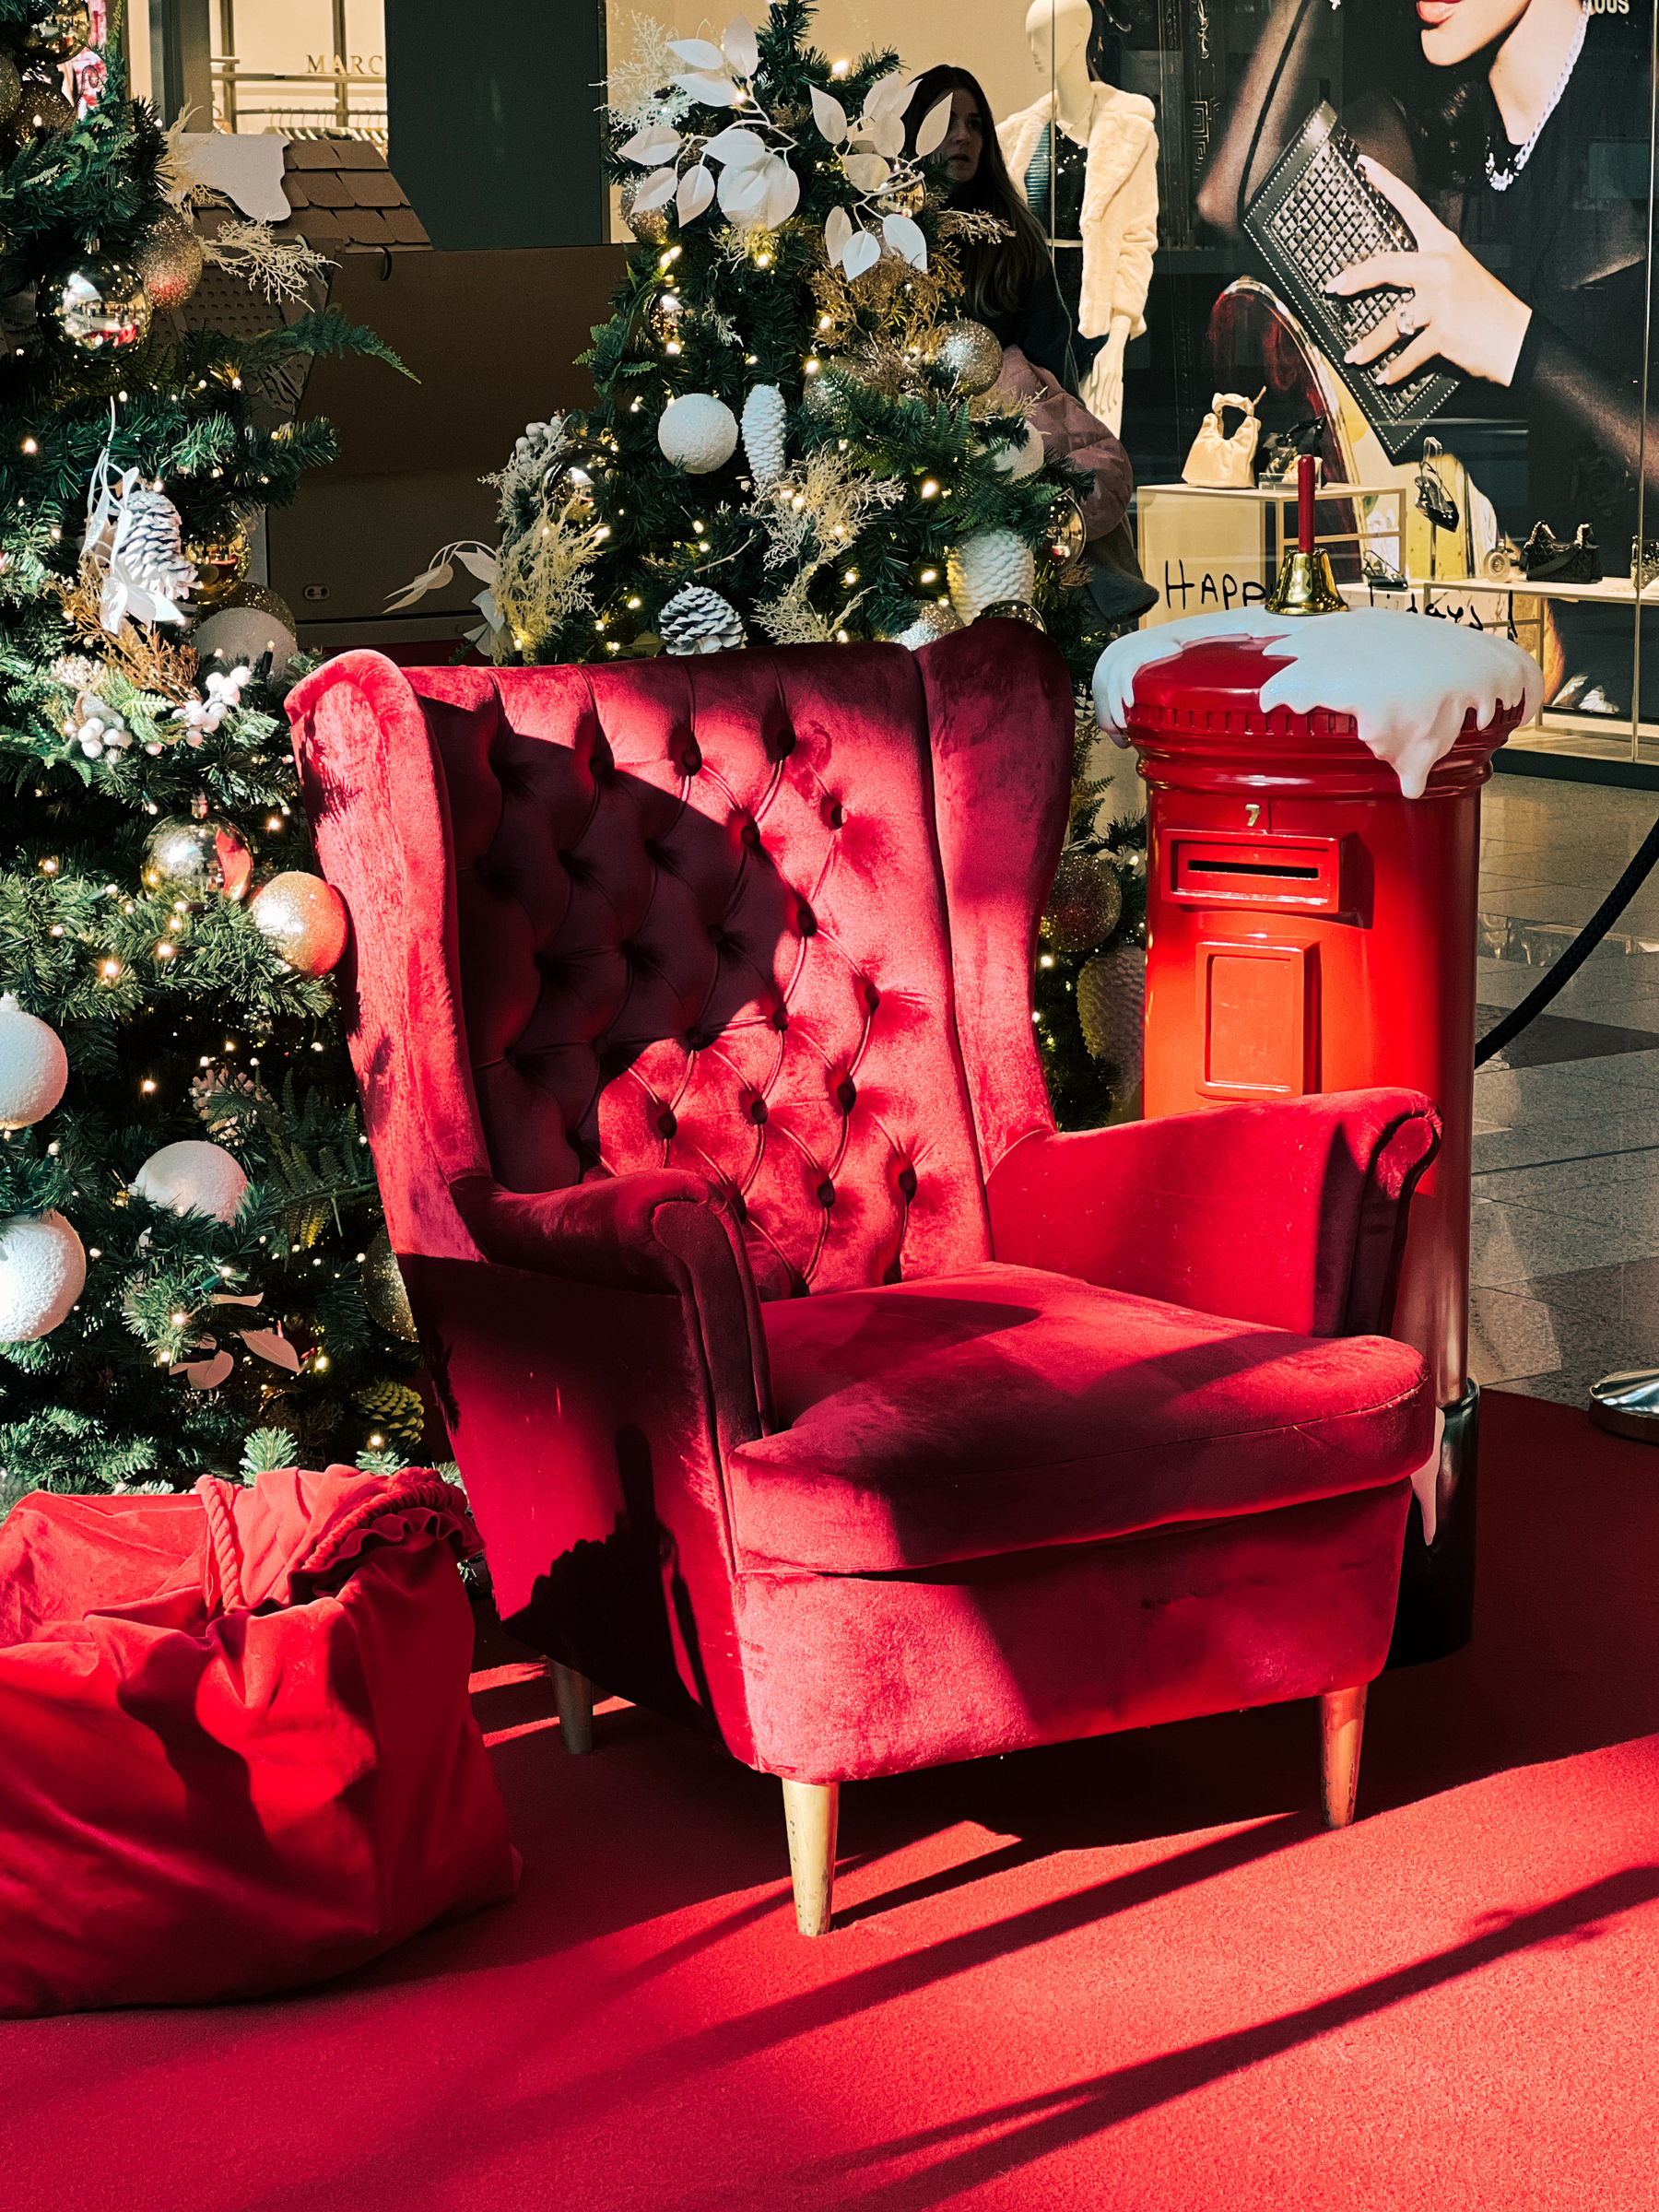 A vibrant red armchair on a red carpet, surrounded by decorated Christmas trees and a red postal box. 